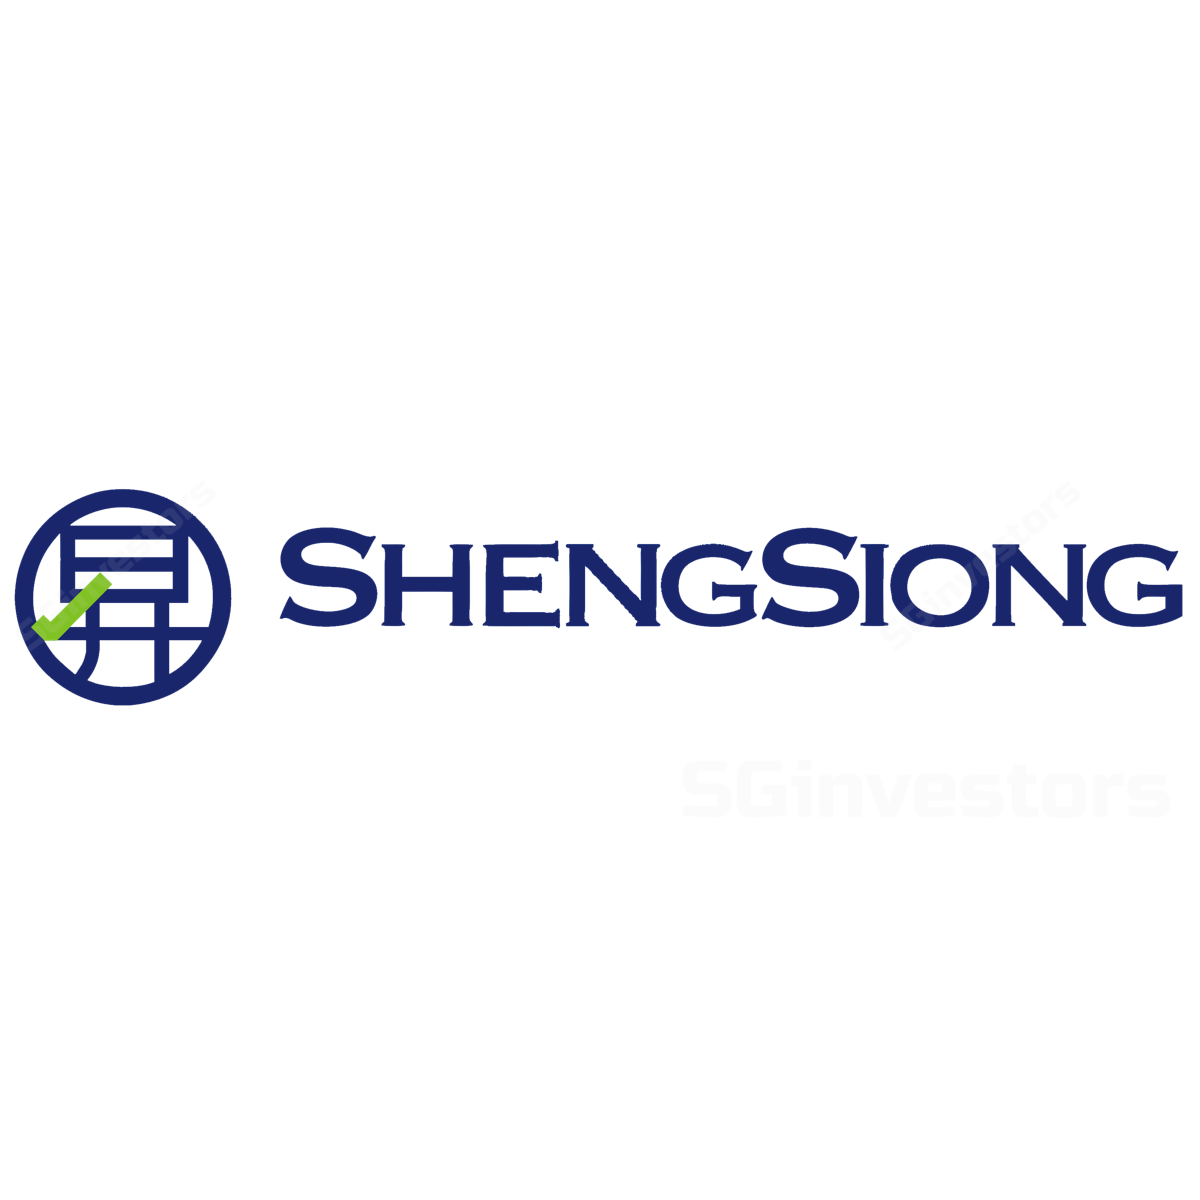 Sheng Siong Group (SSG SP) - DBS Vickers 2017-05-02: A Decent Start